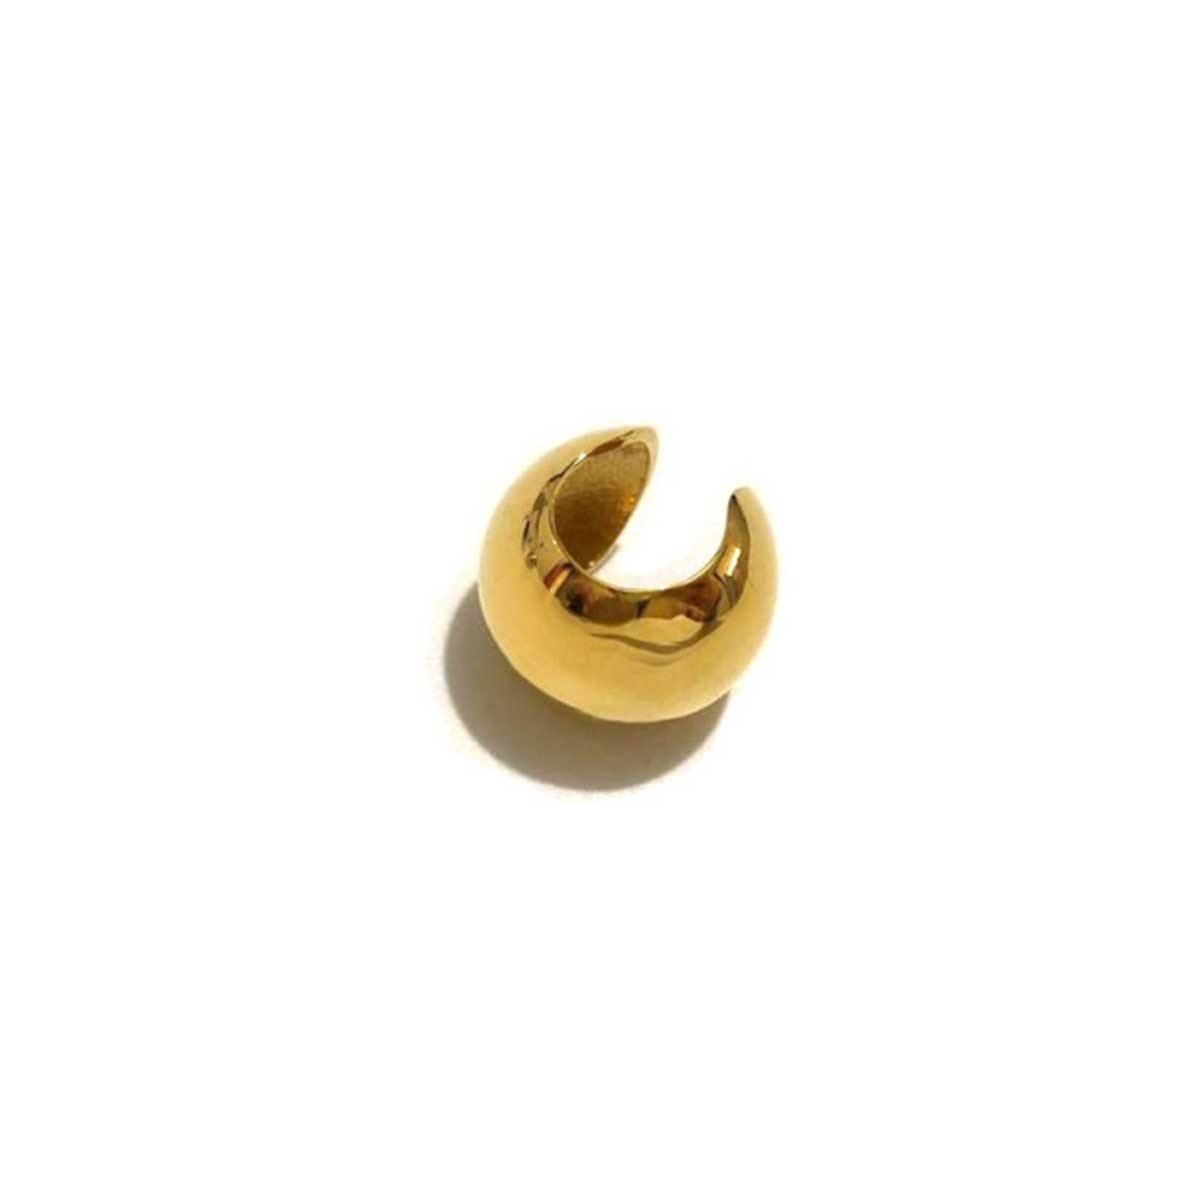 Dainty and smooth gold plated easy click ear cuffs for everyday wear handmade from brass